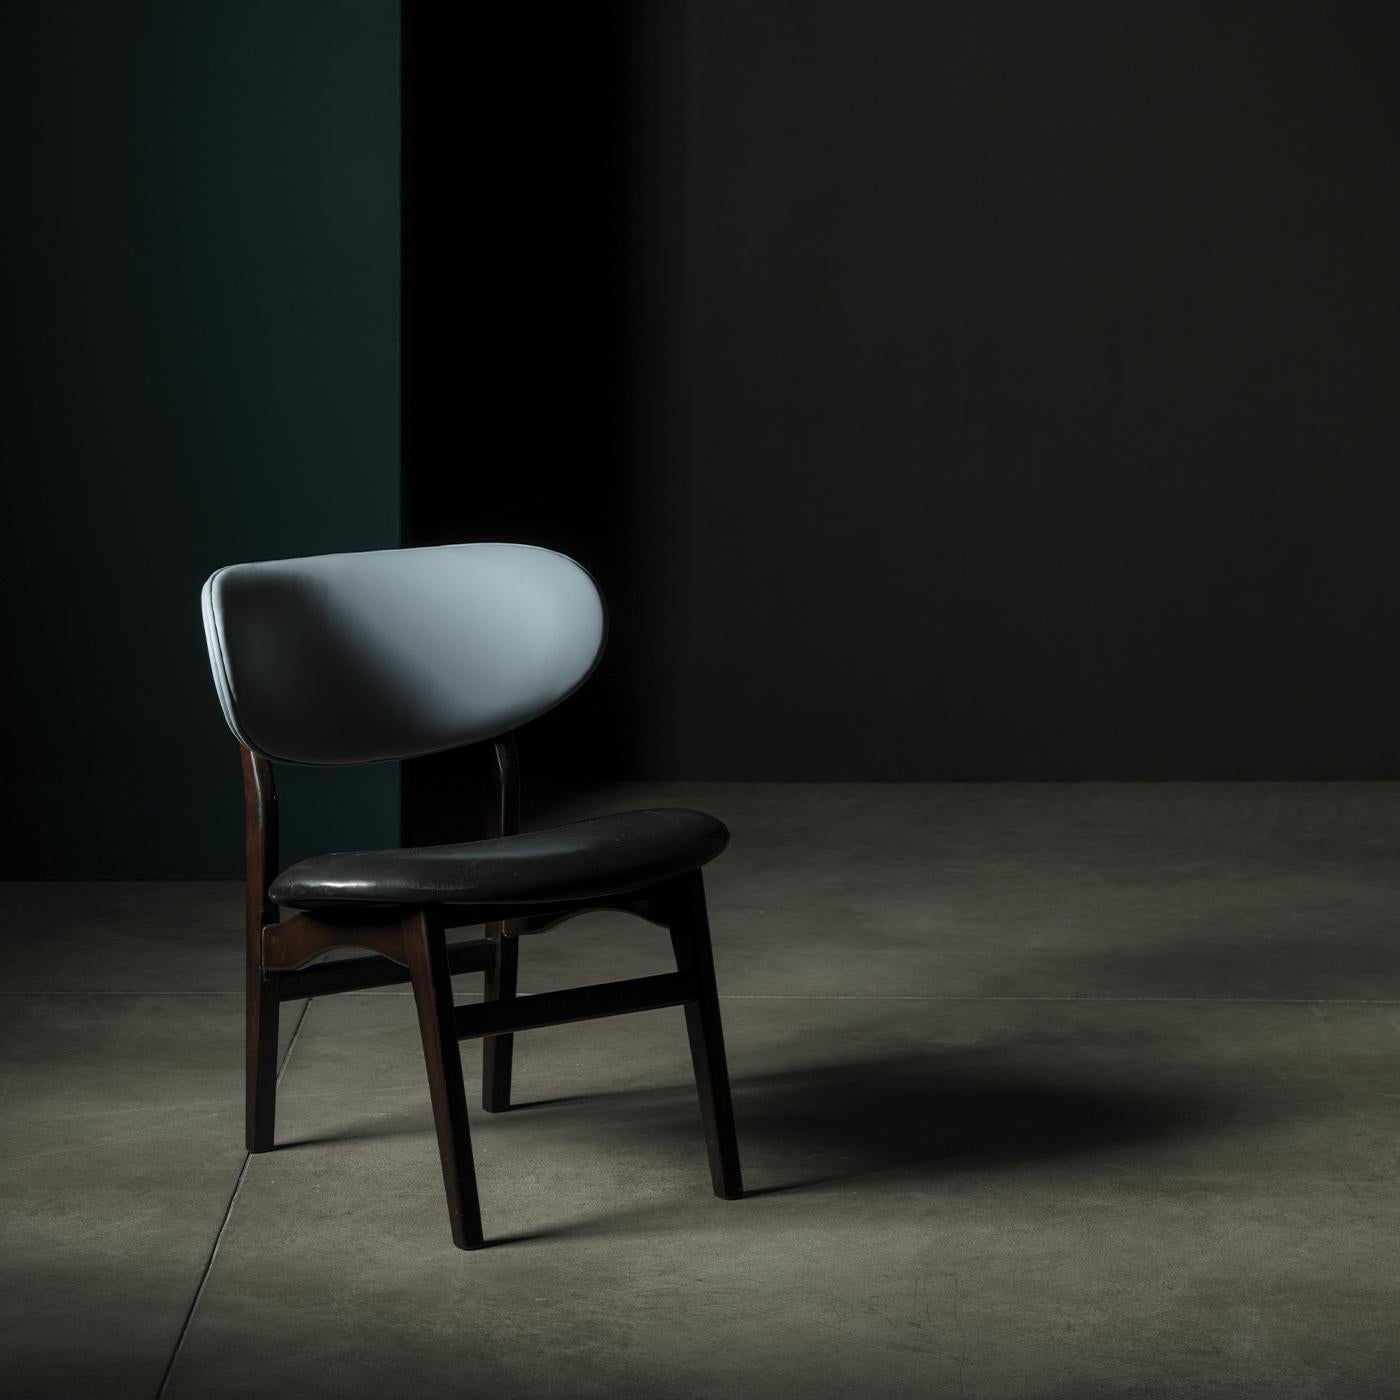 With a silhouette reminiscent of early 20th century design, this sleek, minimalist armchair features a wooden structure with a dark walnut finish. A black leather seat stands in contrast to its back in light blue leather, which adds a touch of